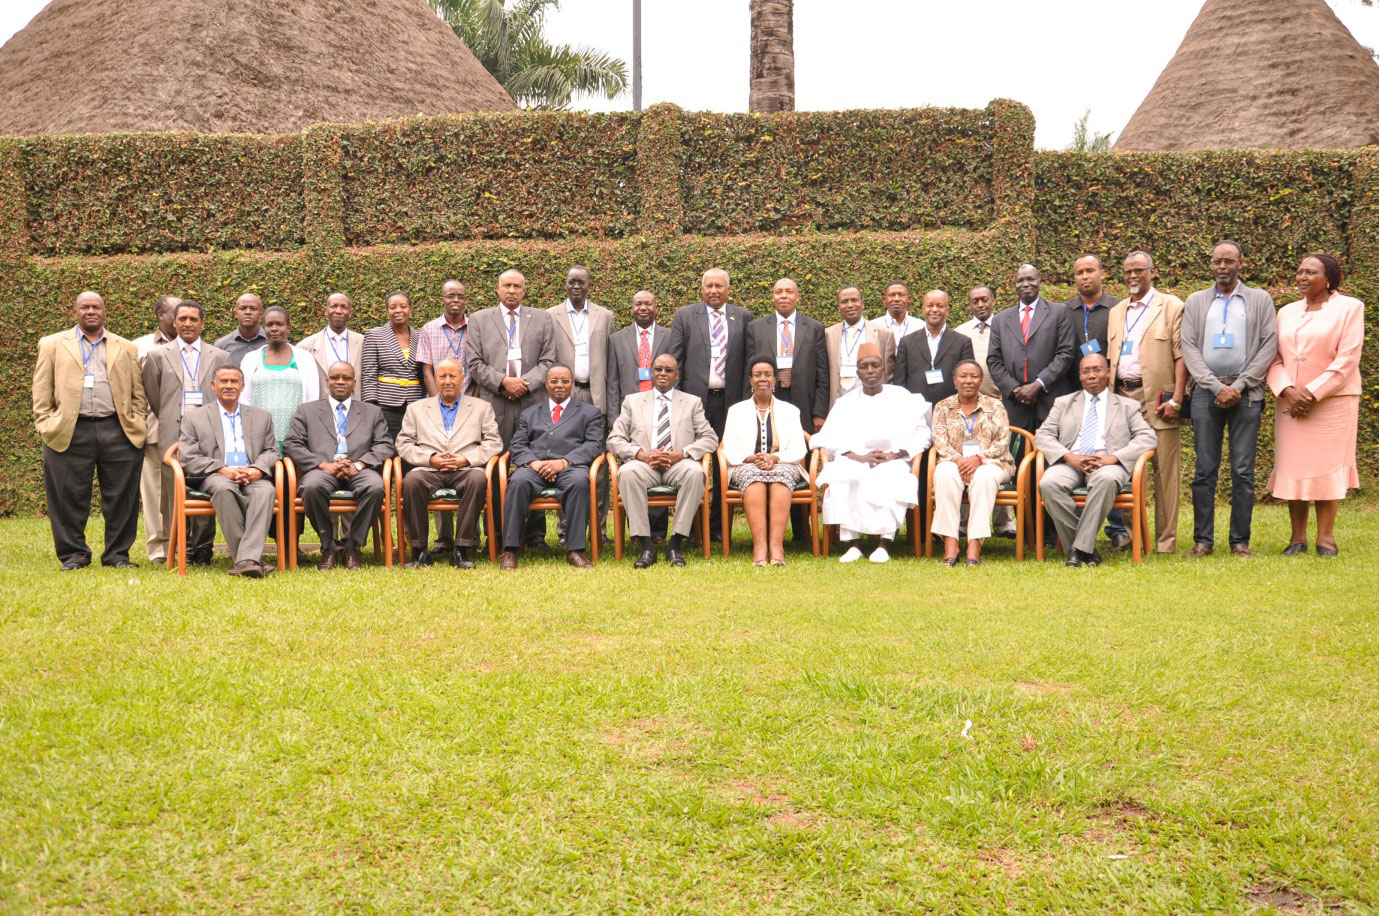 © 2014 AU-IBAR. Participants at the 3rd Project Steering Committee Meeting held on 3rd June 2014 at Imperial Resort Hotel, Munyonyo in Kampala, Uganda